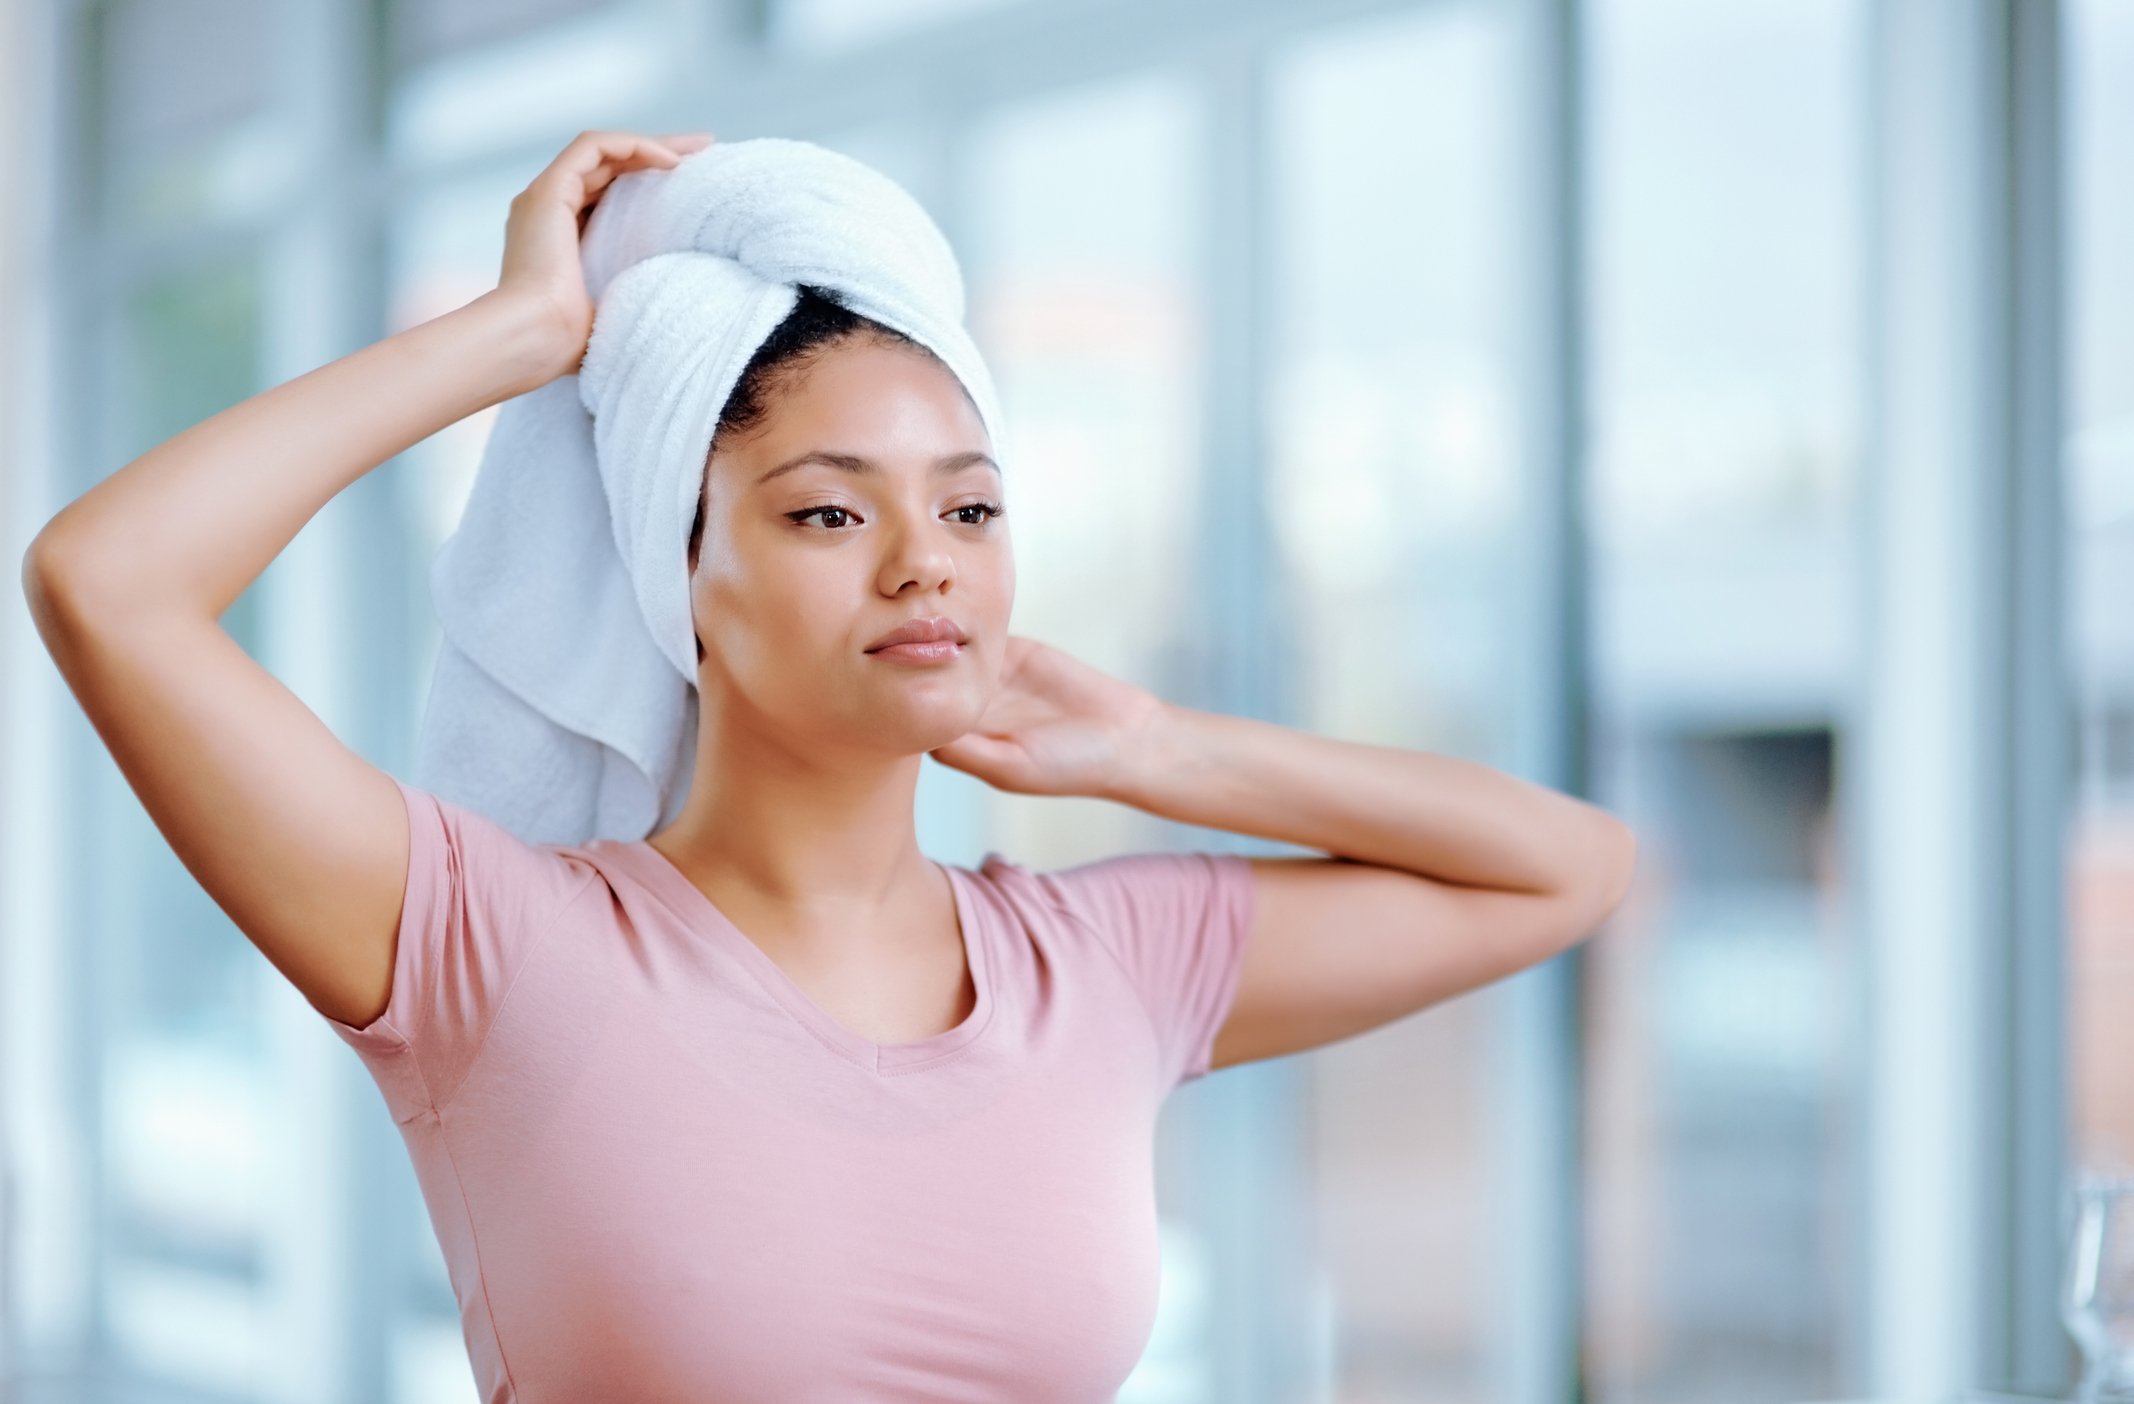 Young woman puts her hair in a towel to leave for drying